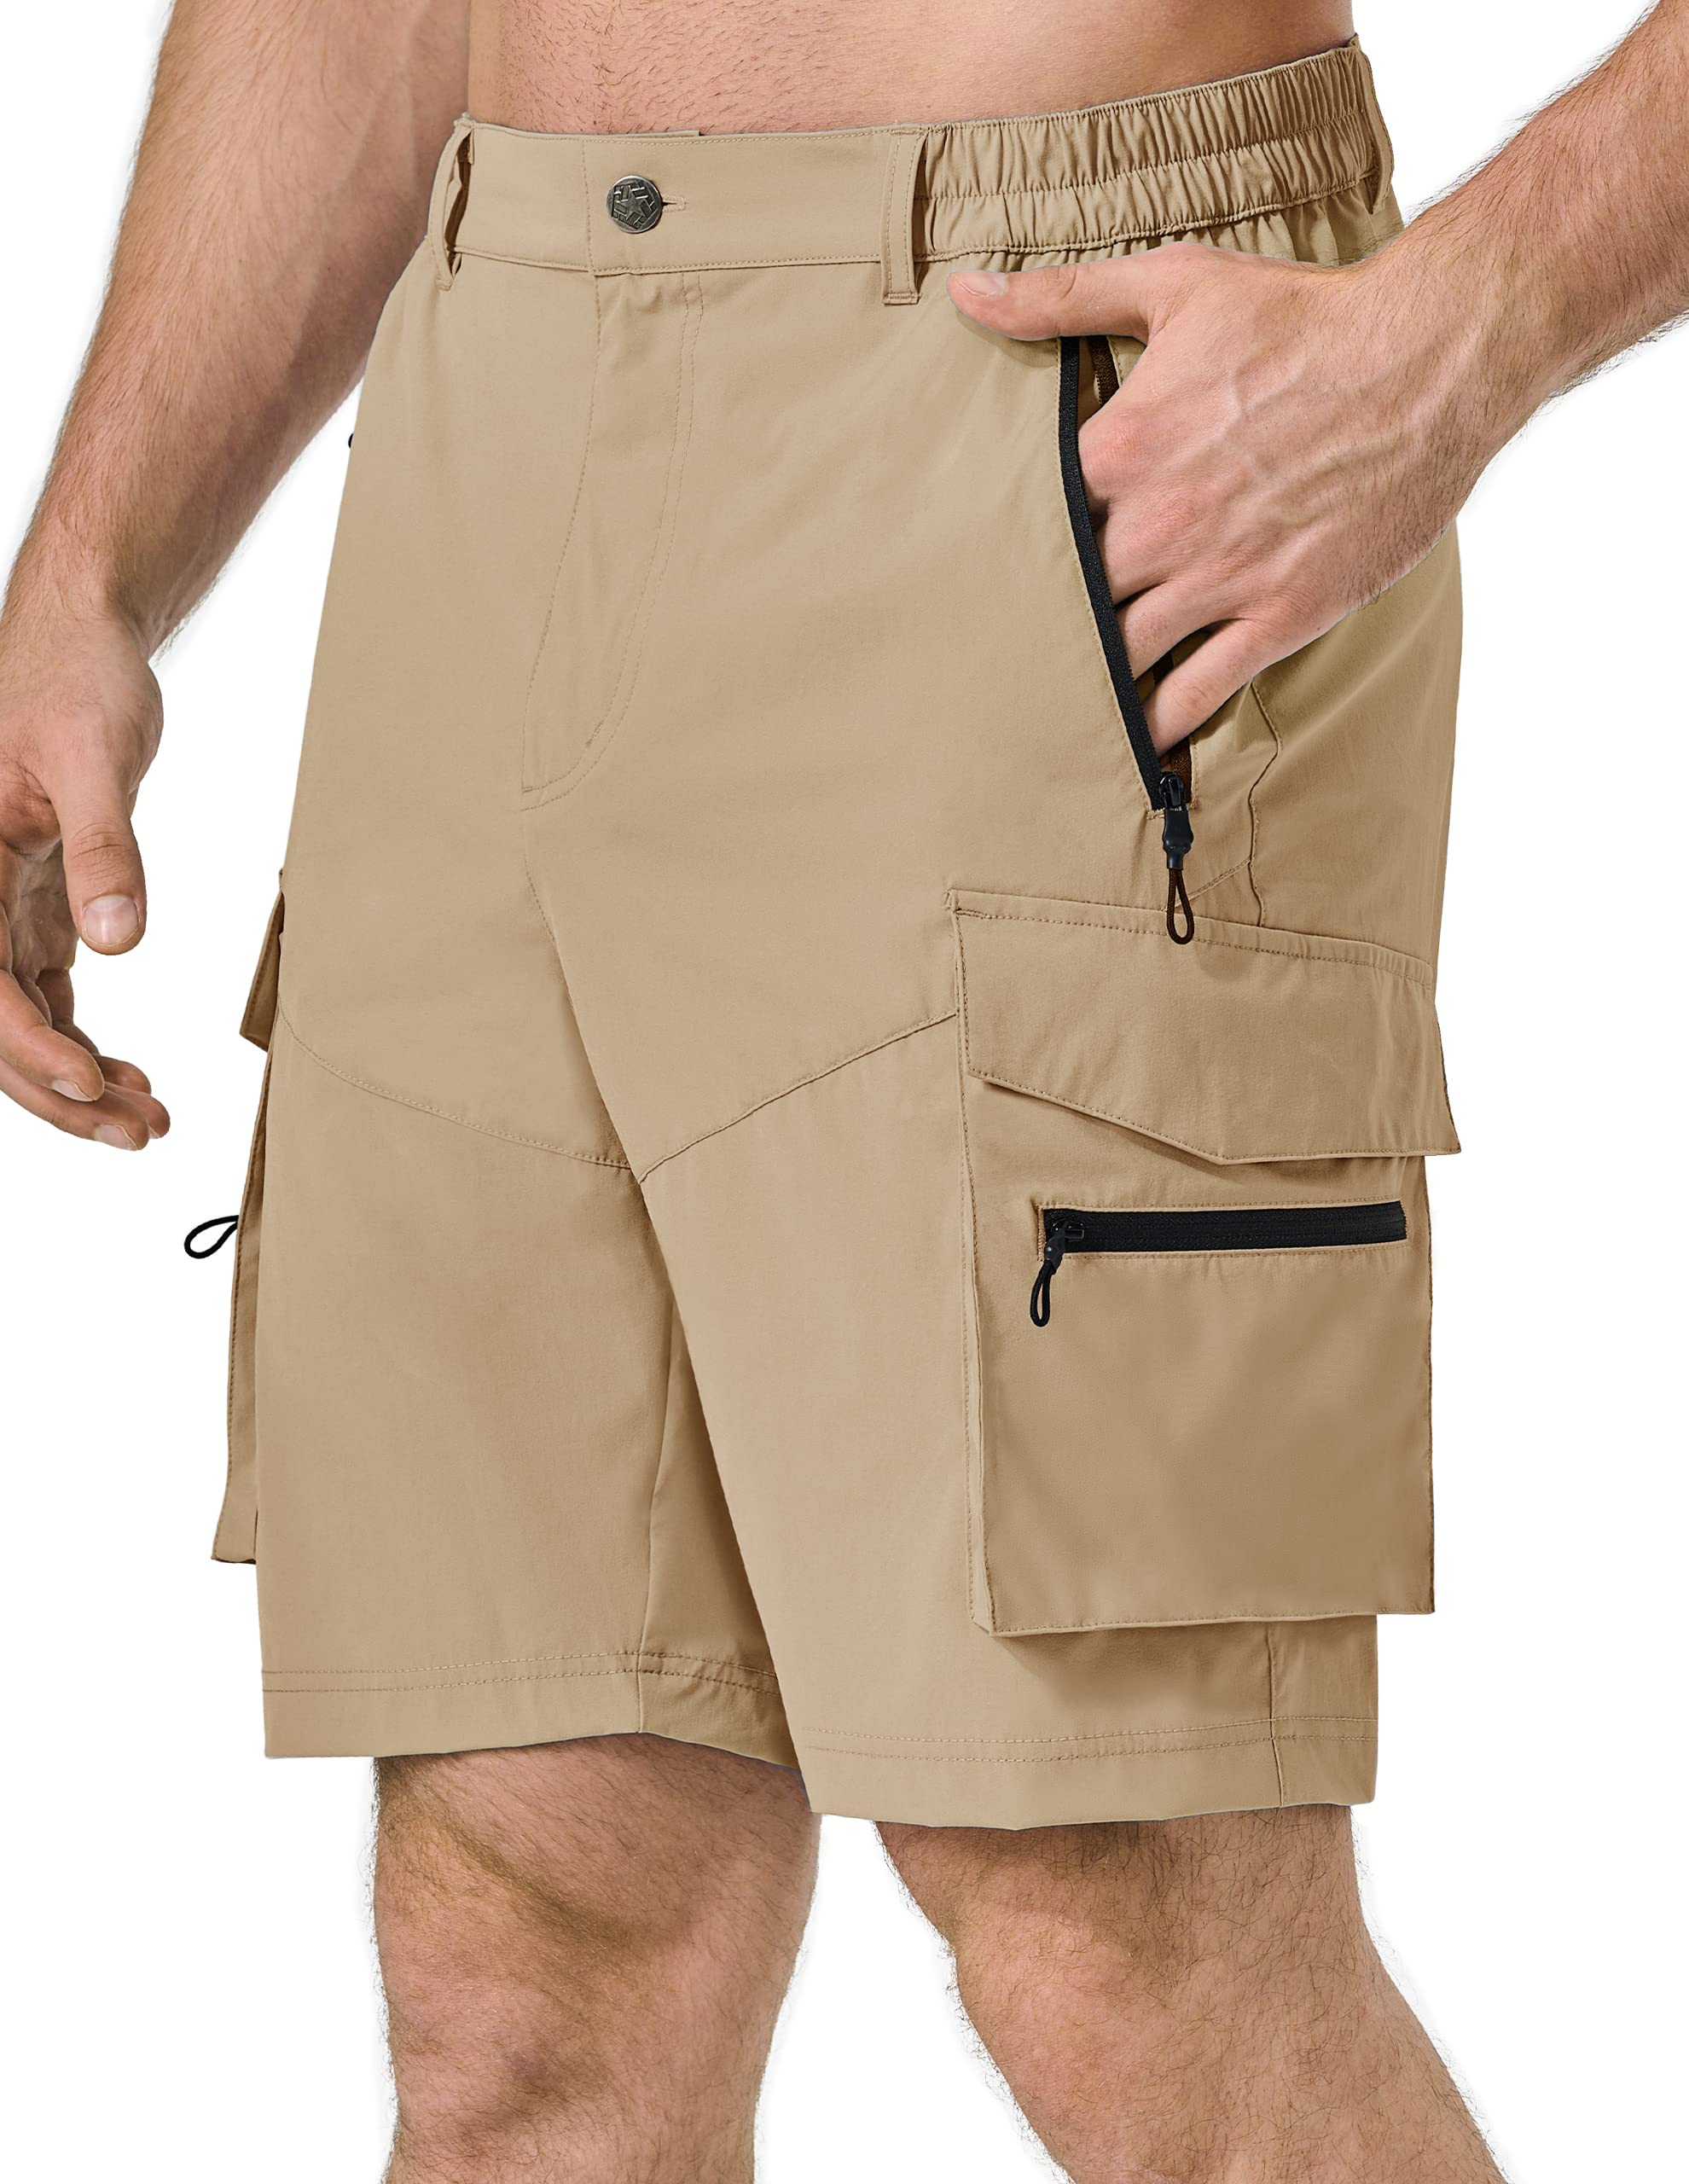 Pausel Men's Hiking Tactical Shorts Cargo Quick Dry Outdoor Golf Shorts  with 5 Pockets for Work